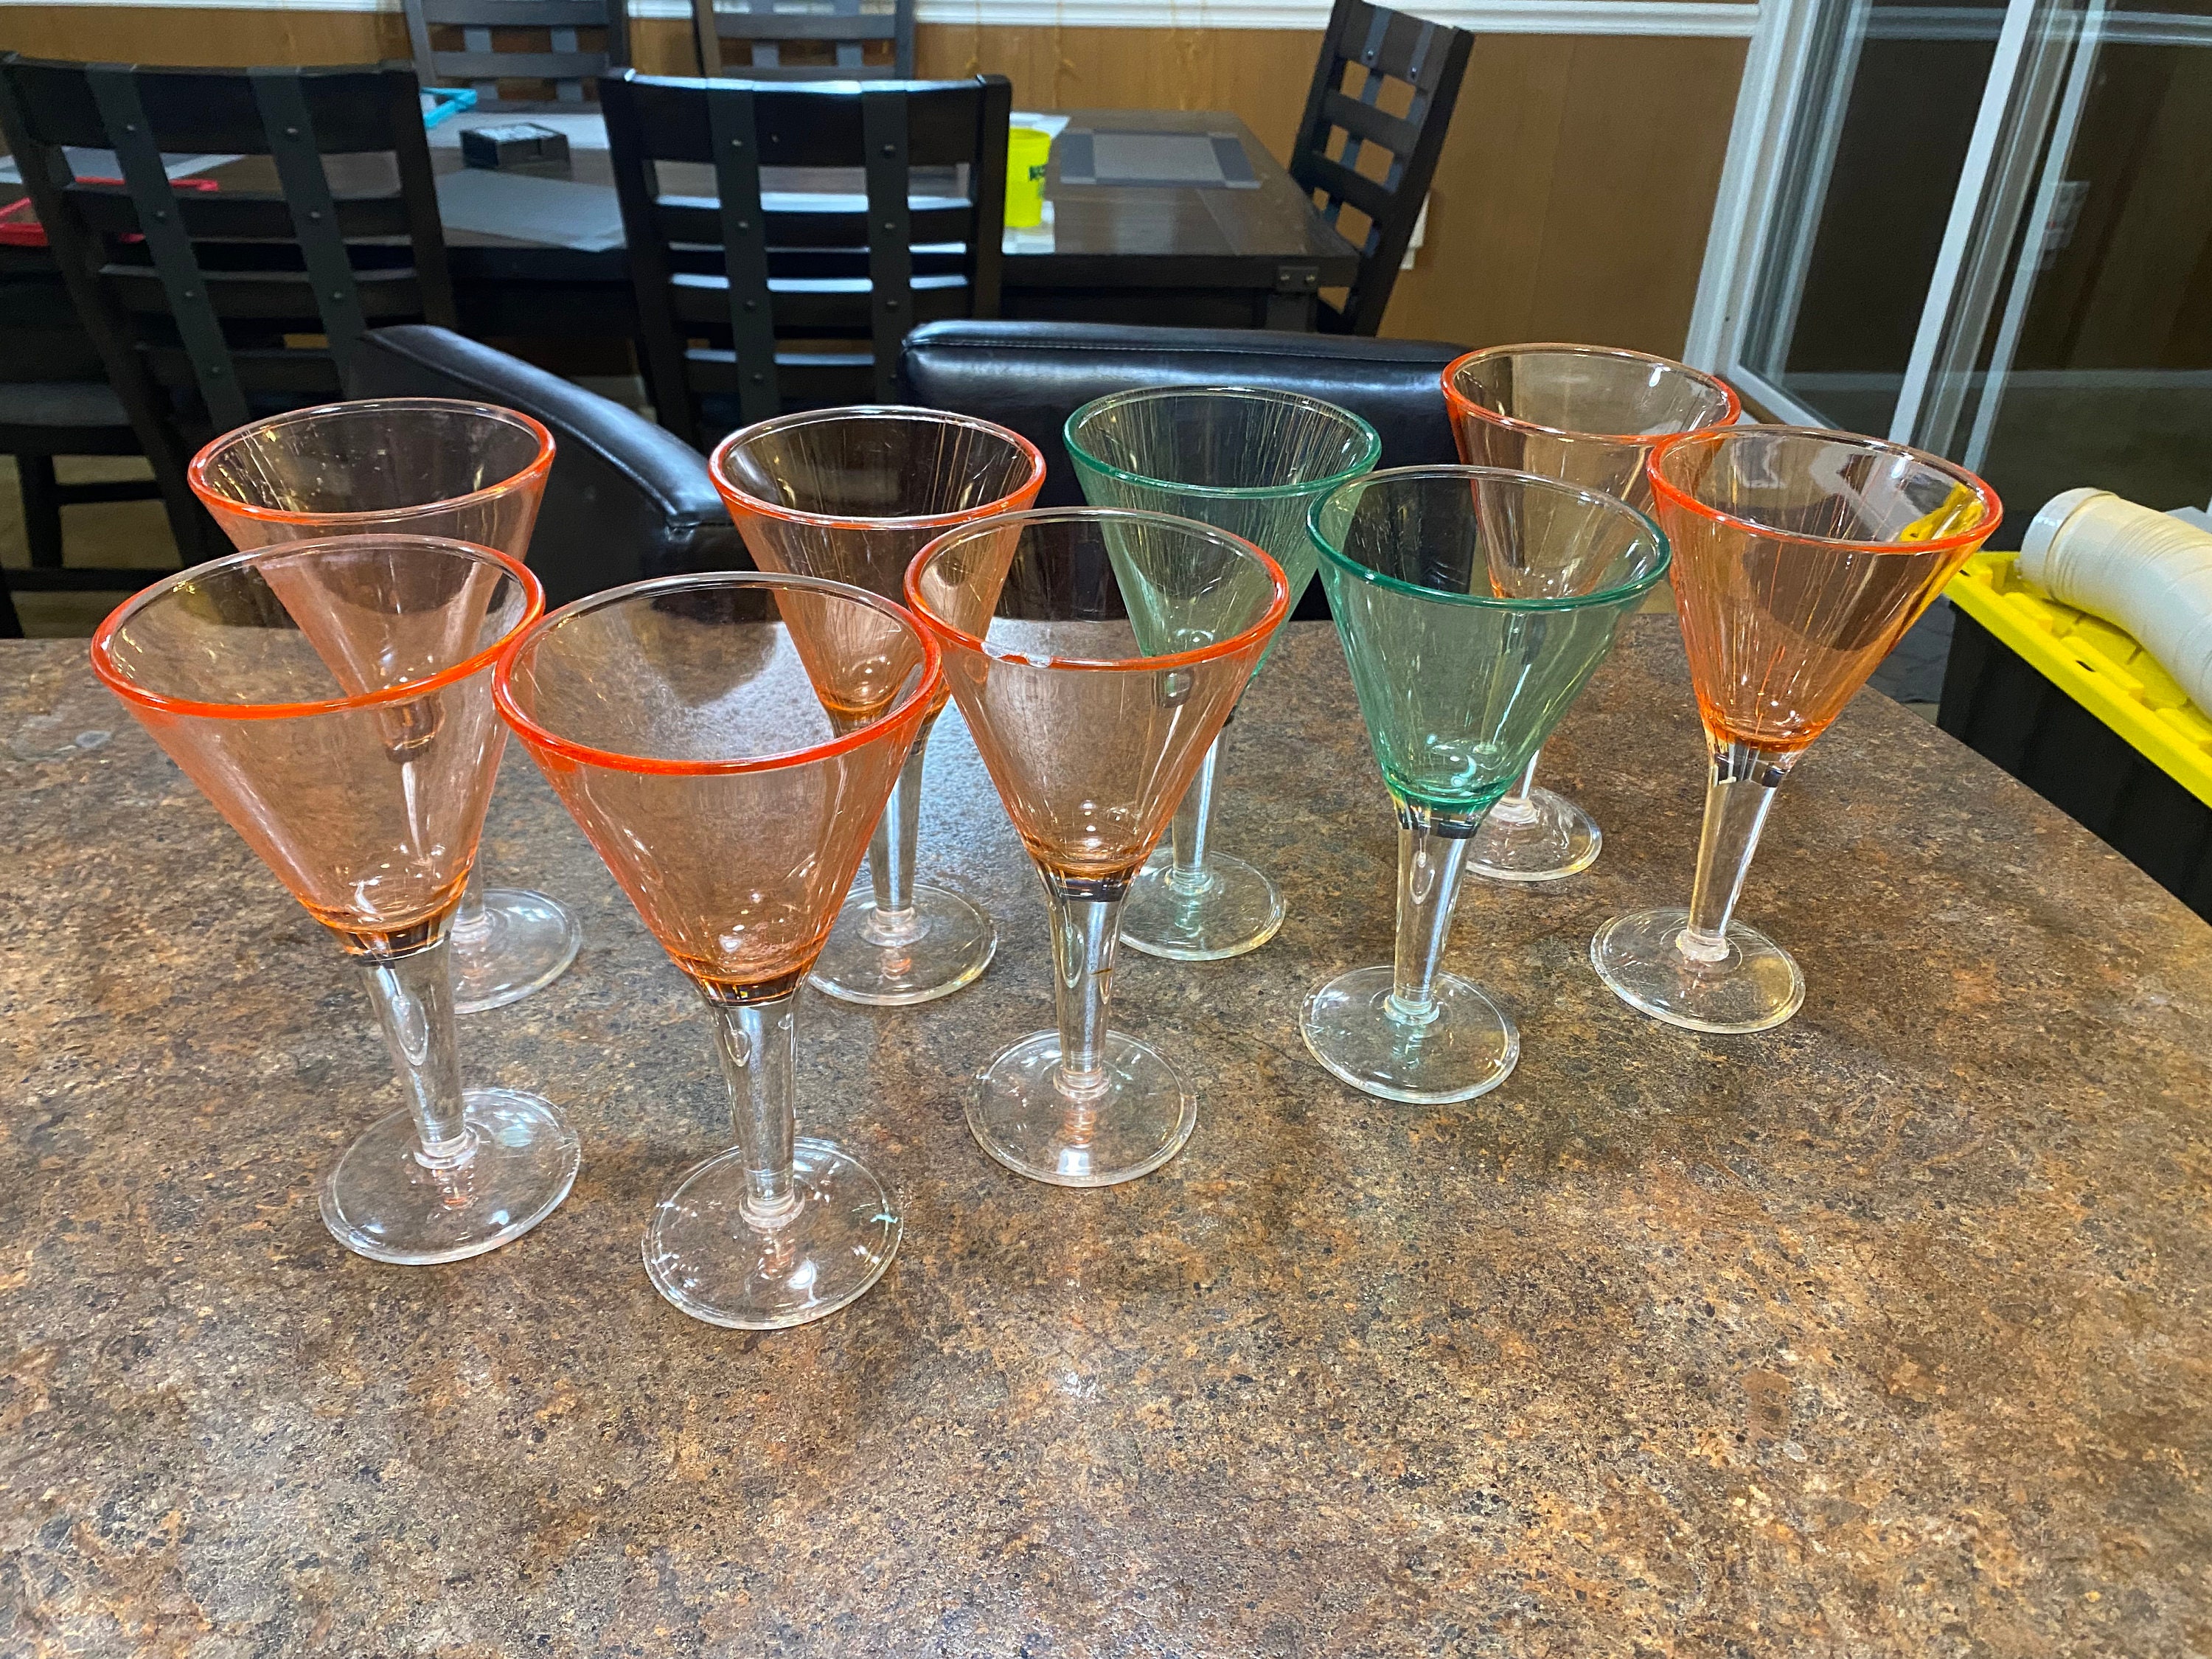 Unbreakable Pastel Color Acrylic Martini Glasses | Set of 6 | European  Style Cocktail Cups 100% Tritan Drinkware, 5 oz Dishwasher Safe BPA-free